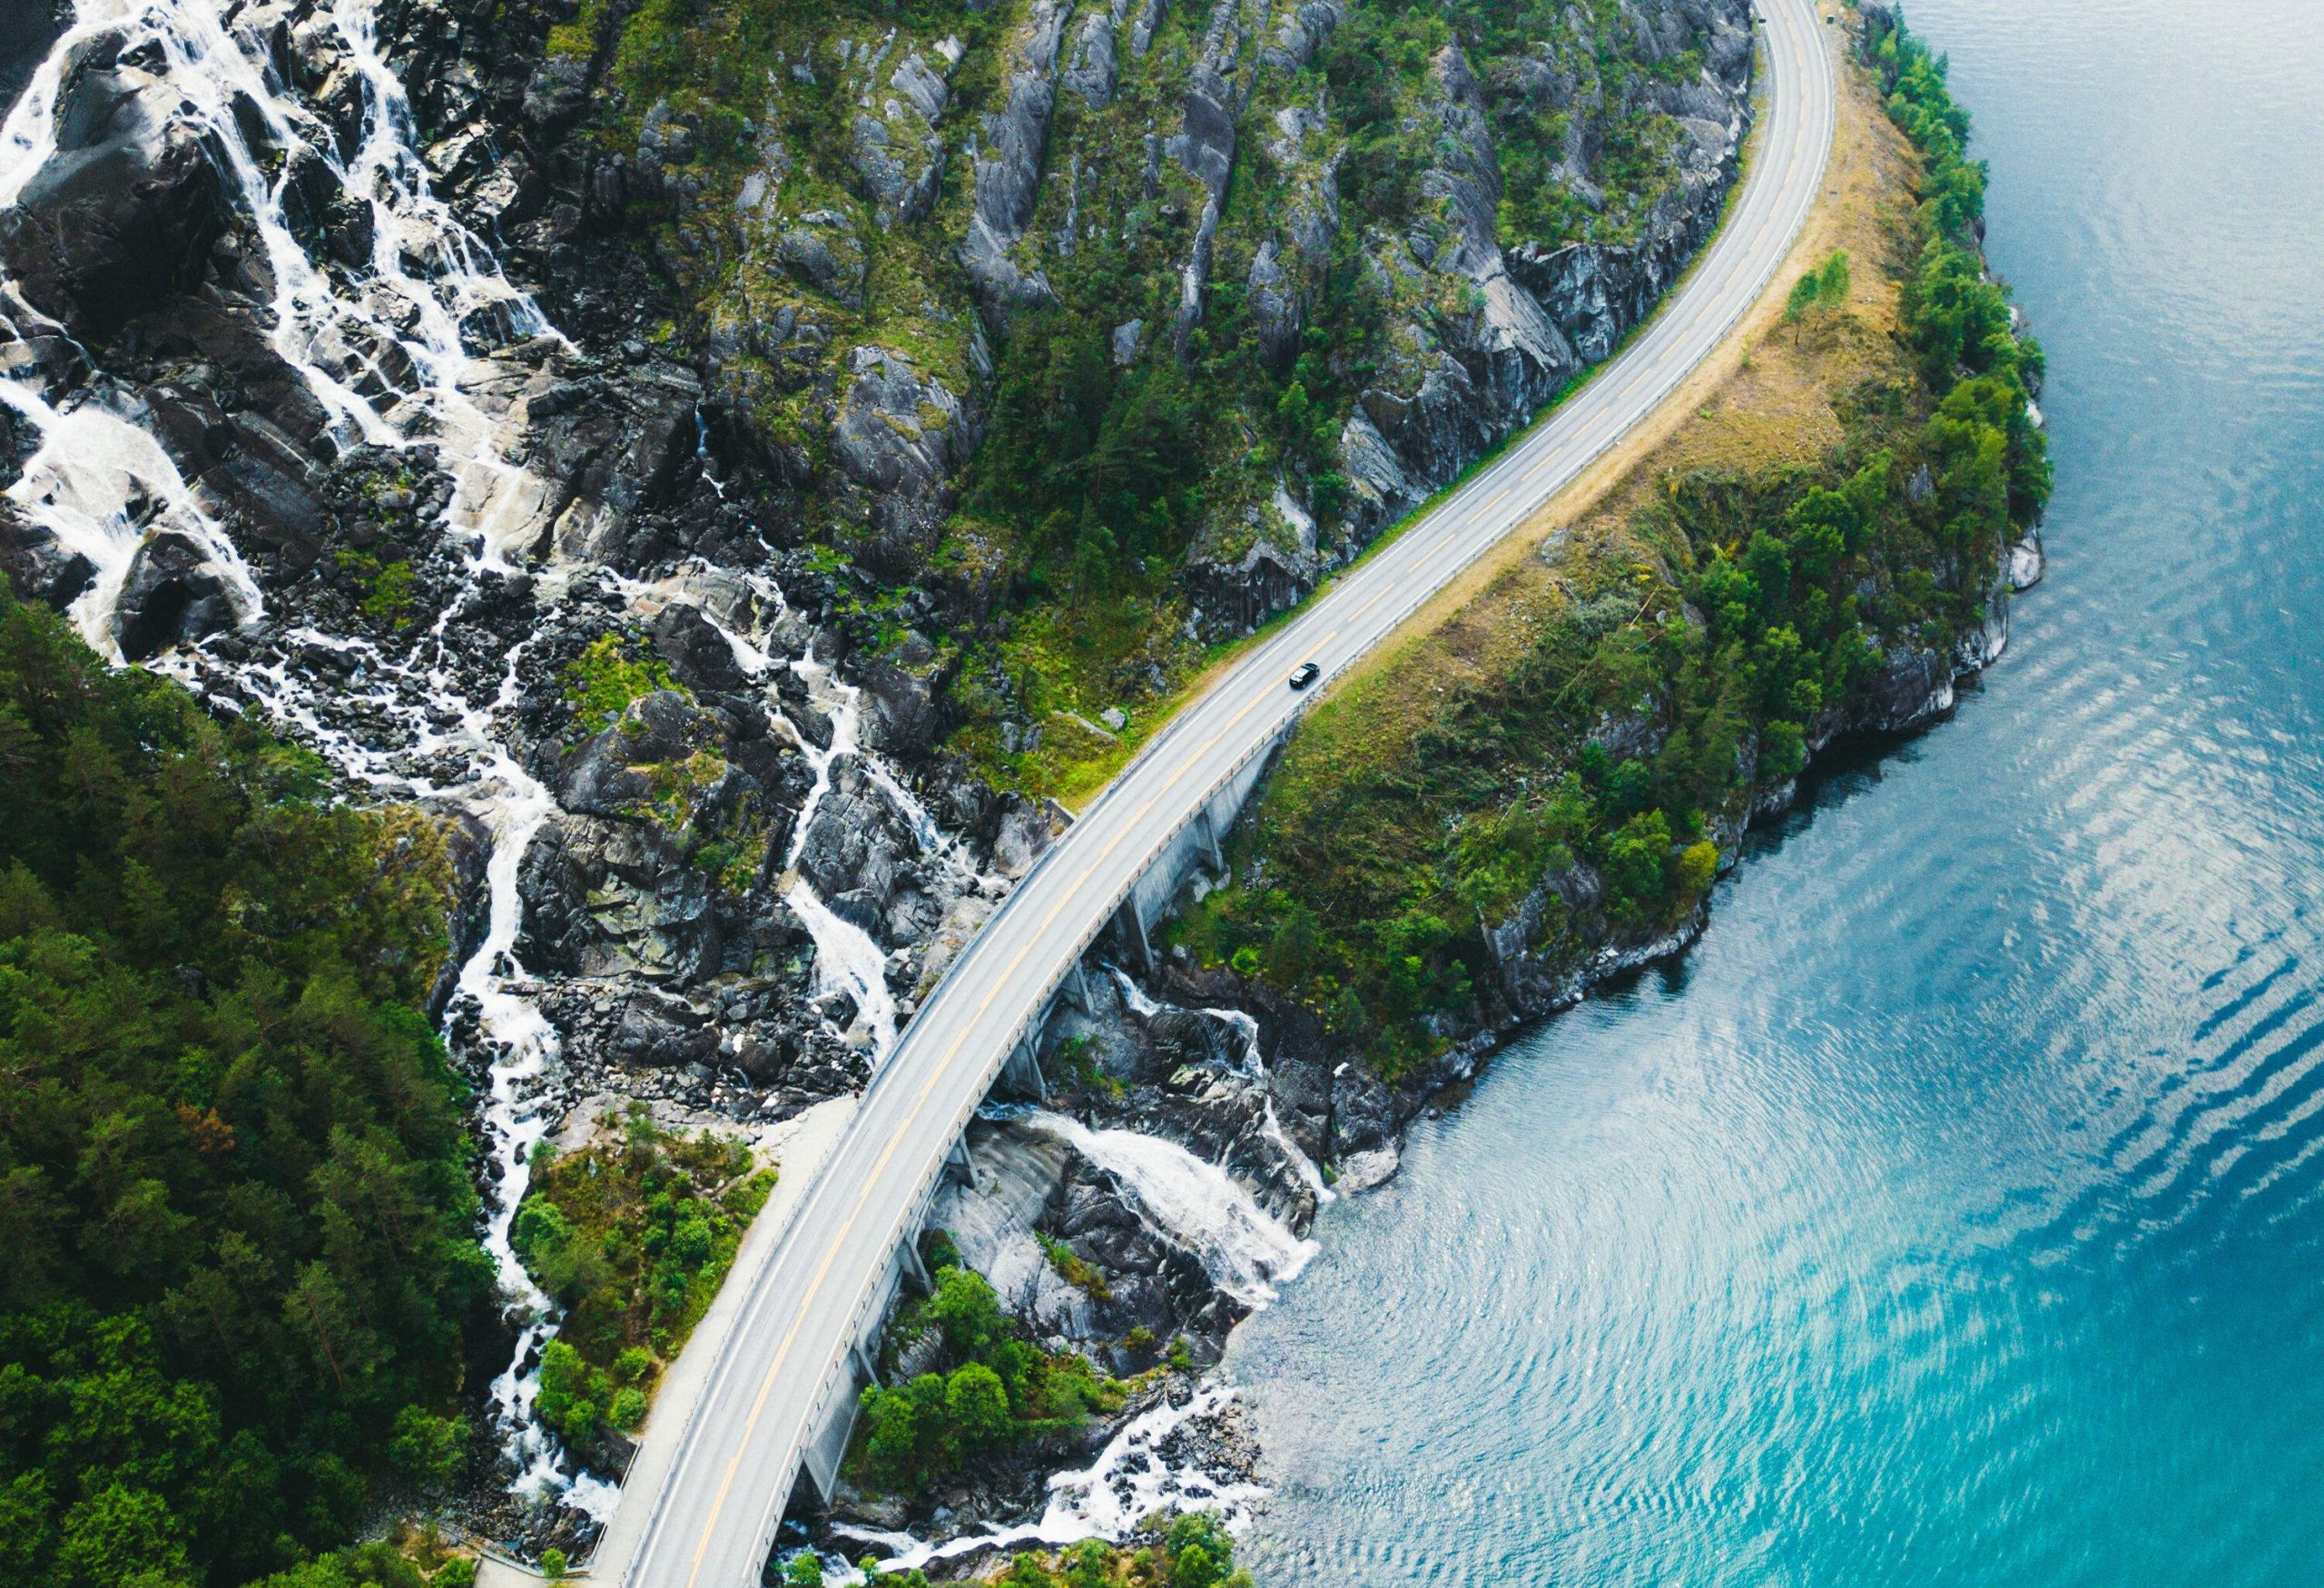 A car travels on a coastal road that crosses a hillside waterfall that pours into the ocean.